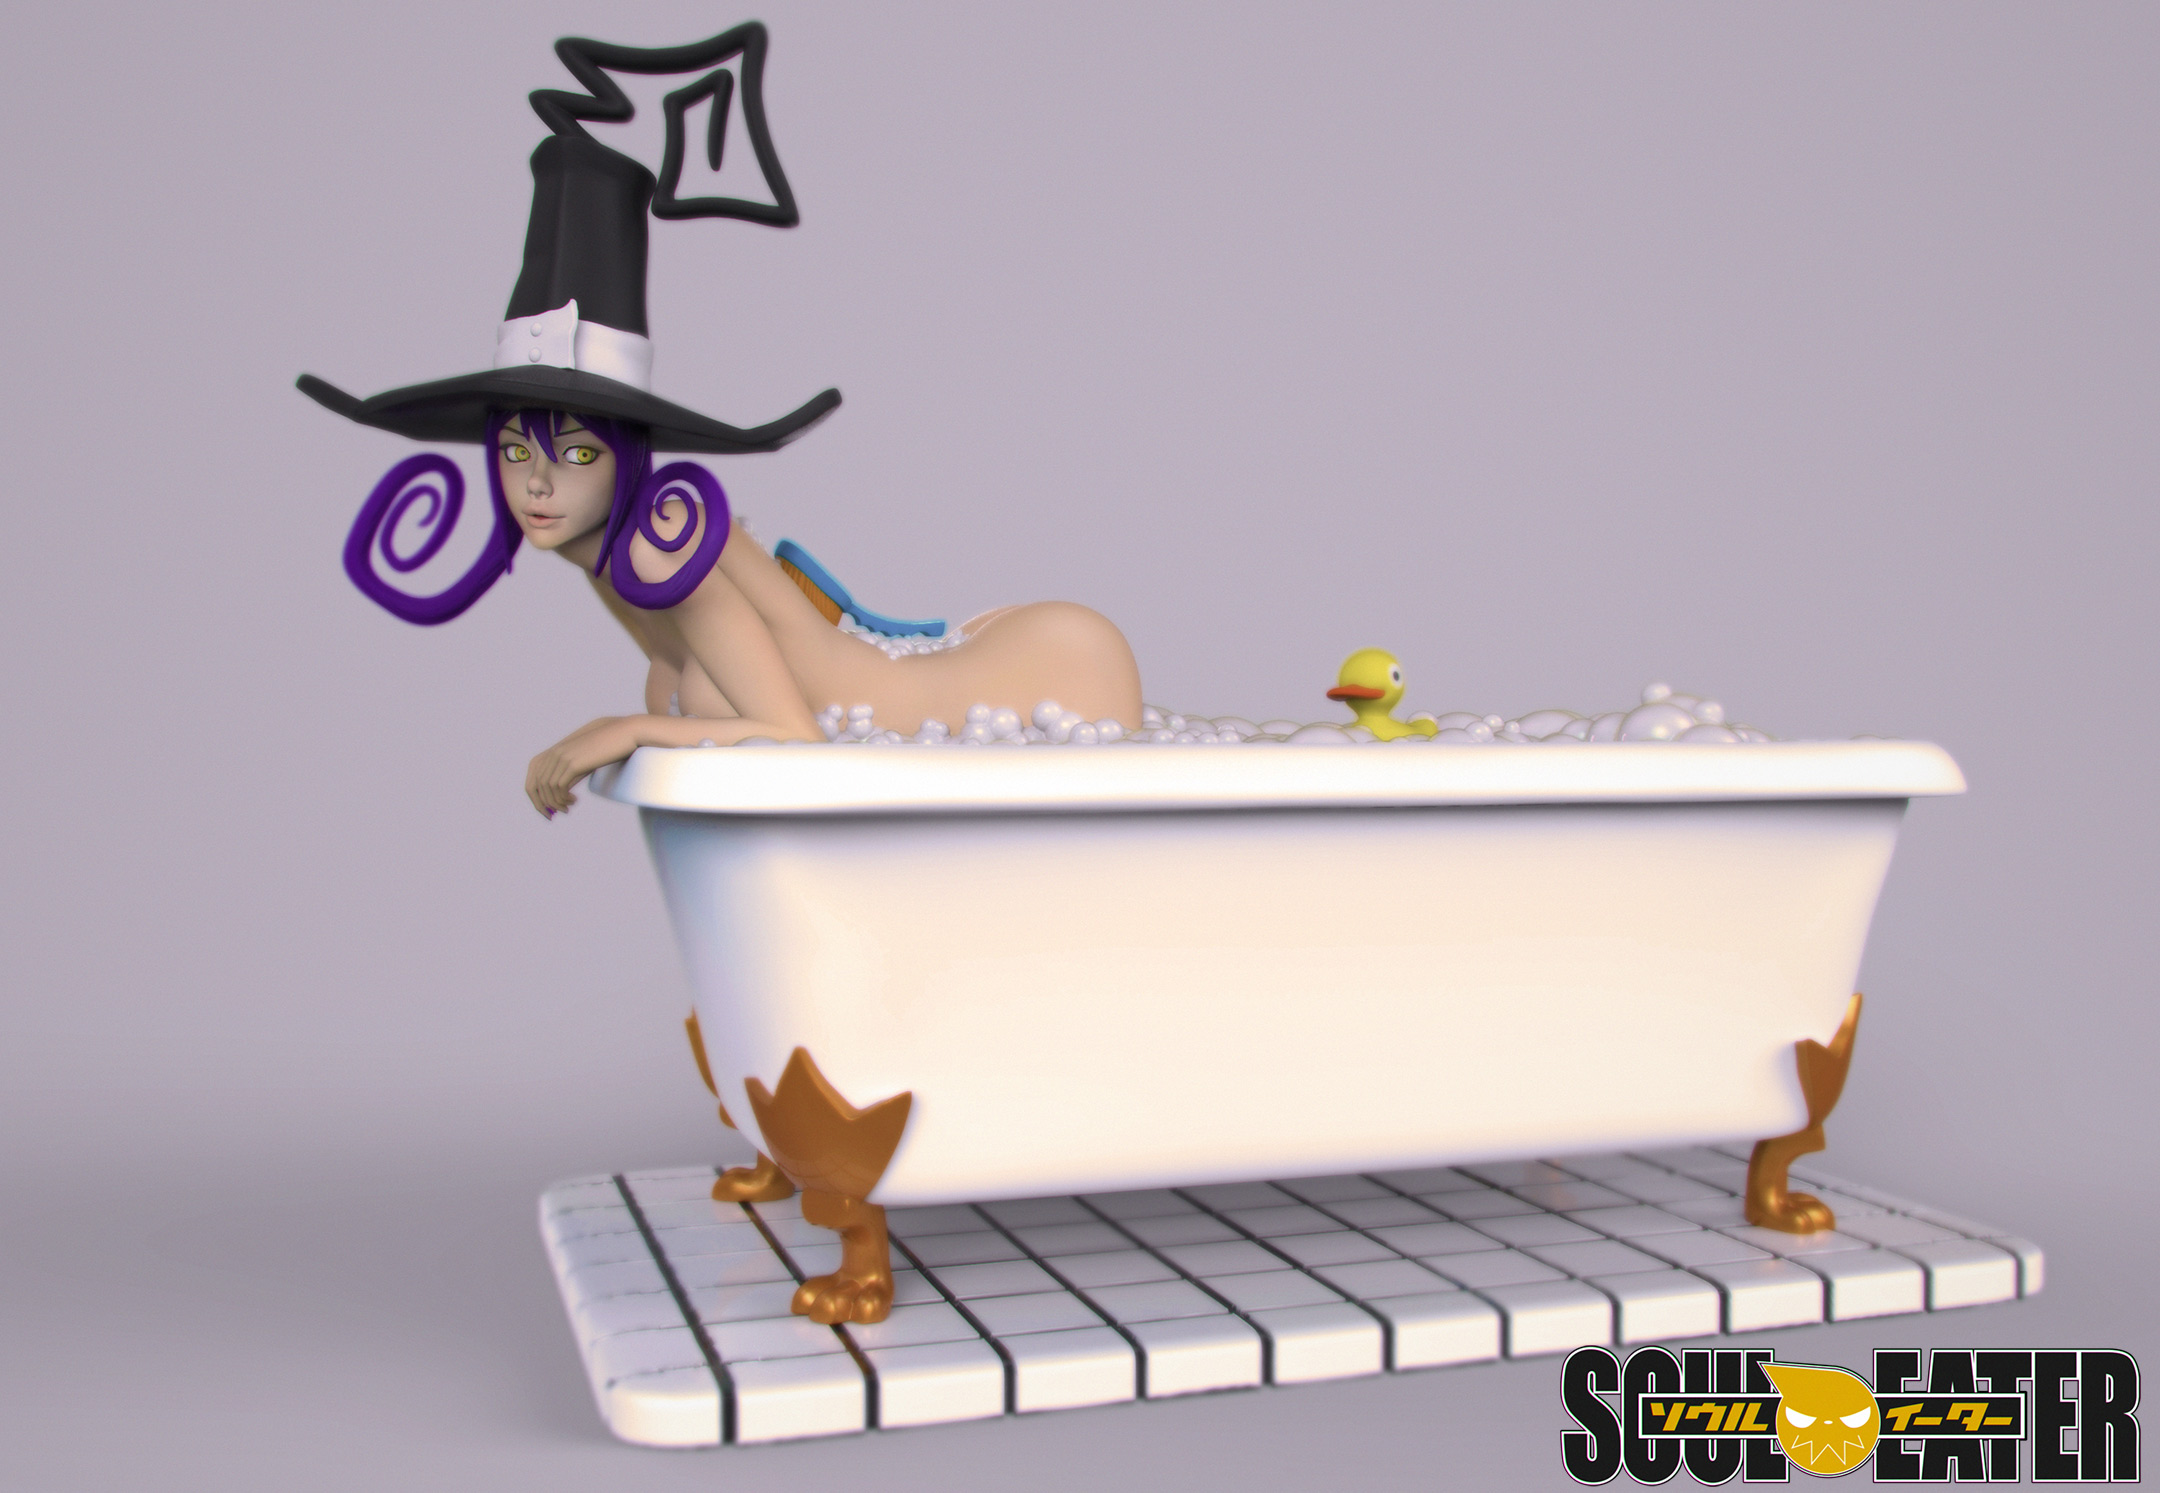 Blair in a tub: Timelapse - YouTube/ame.